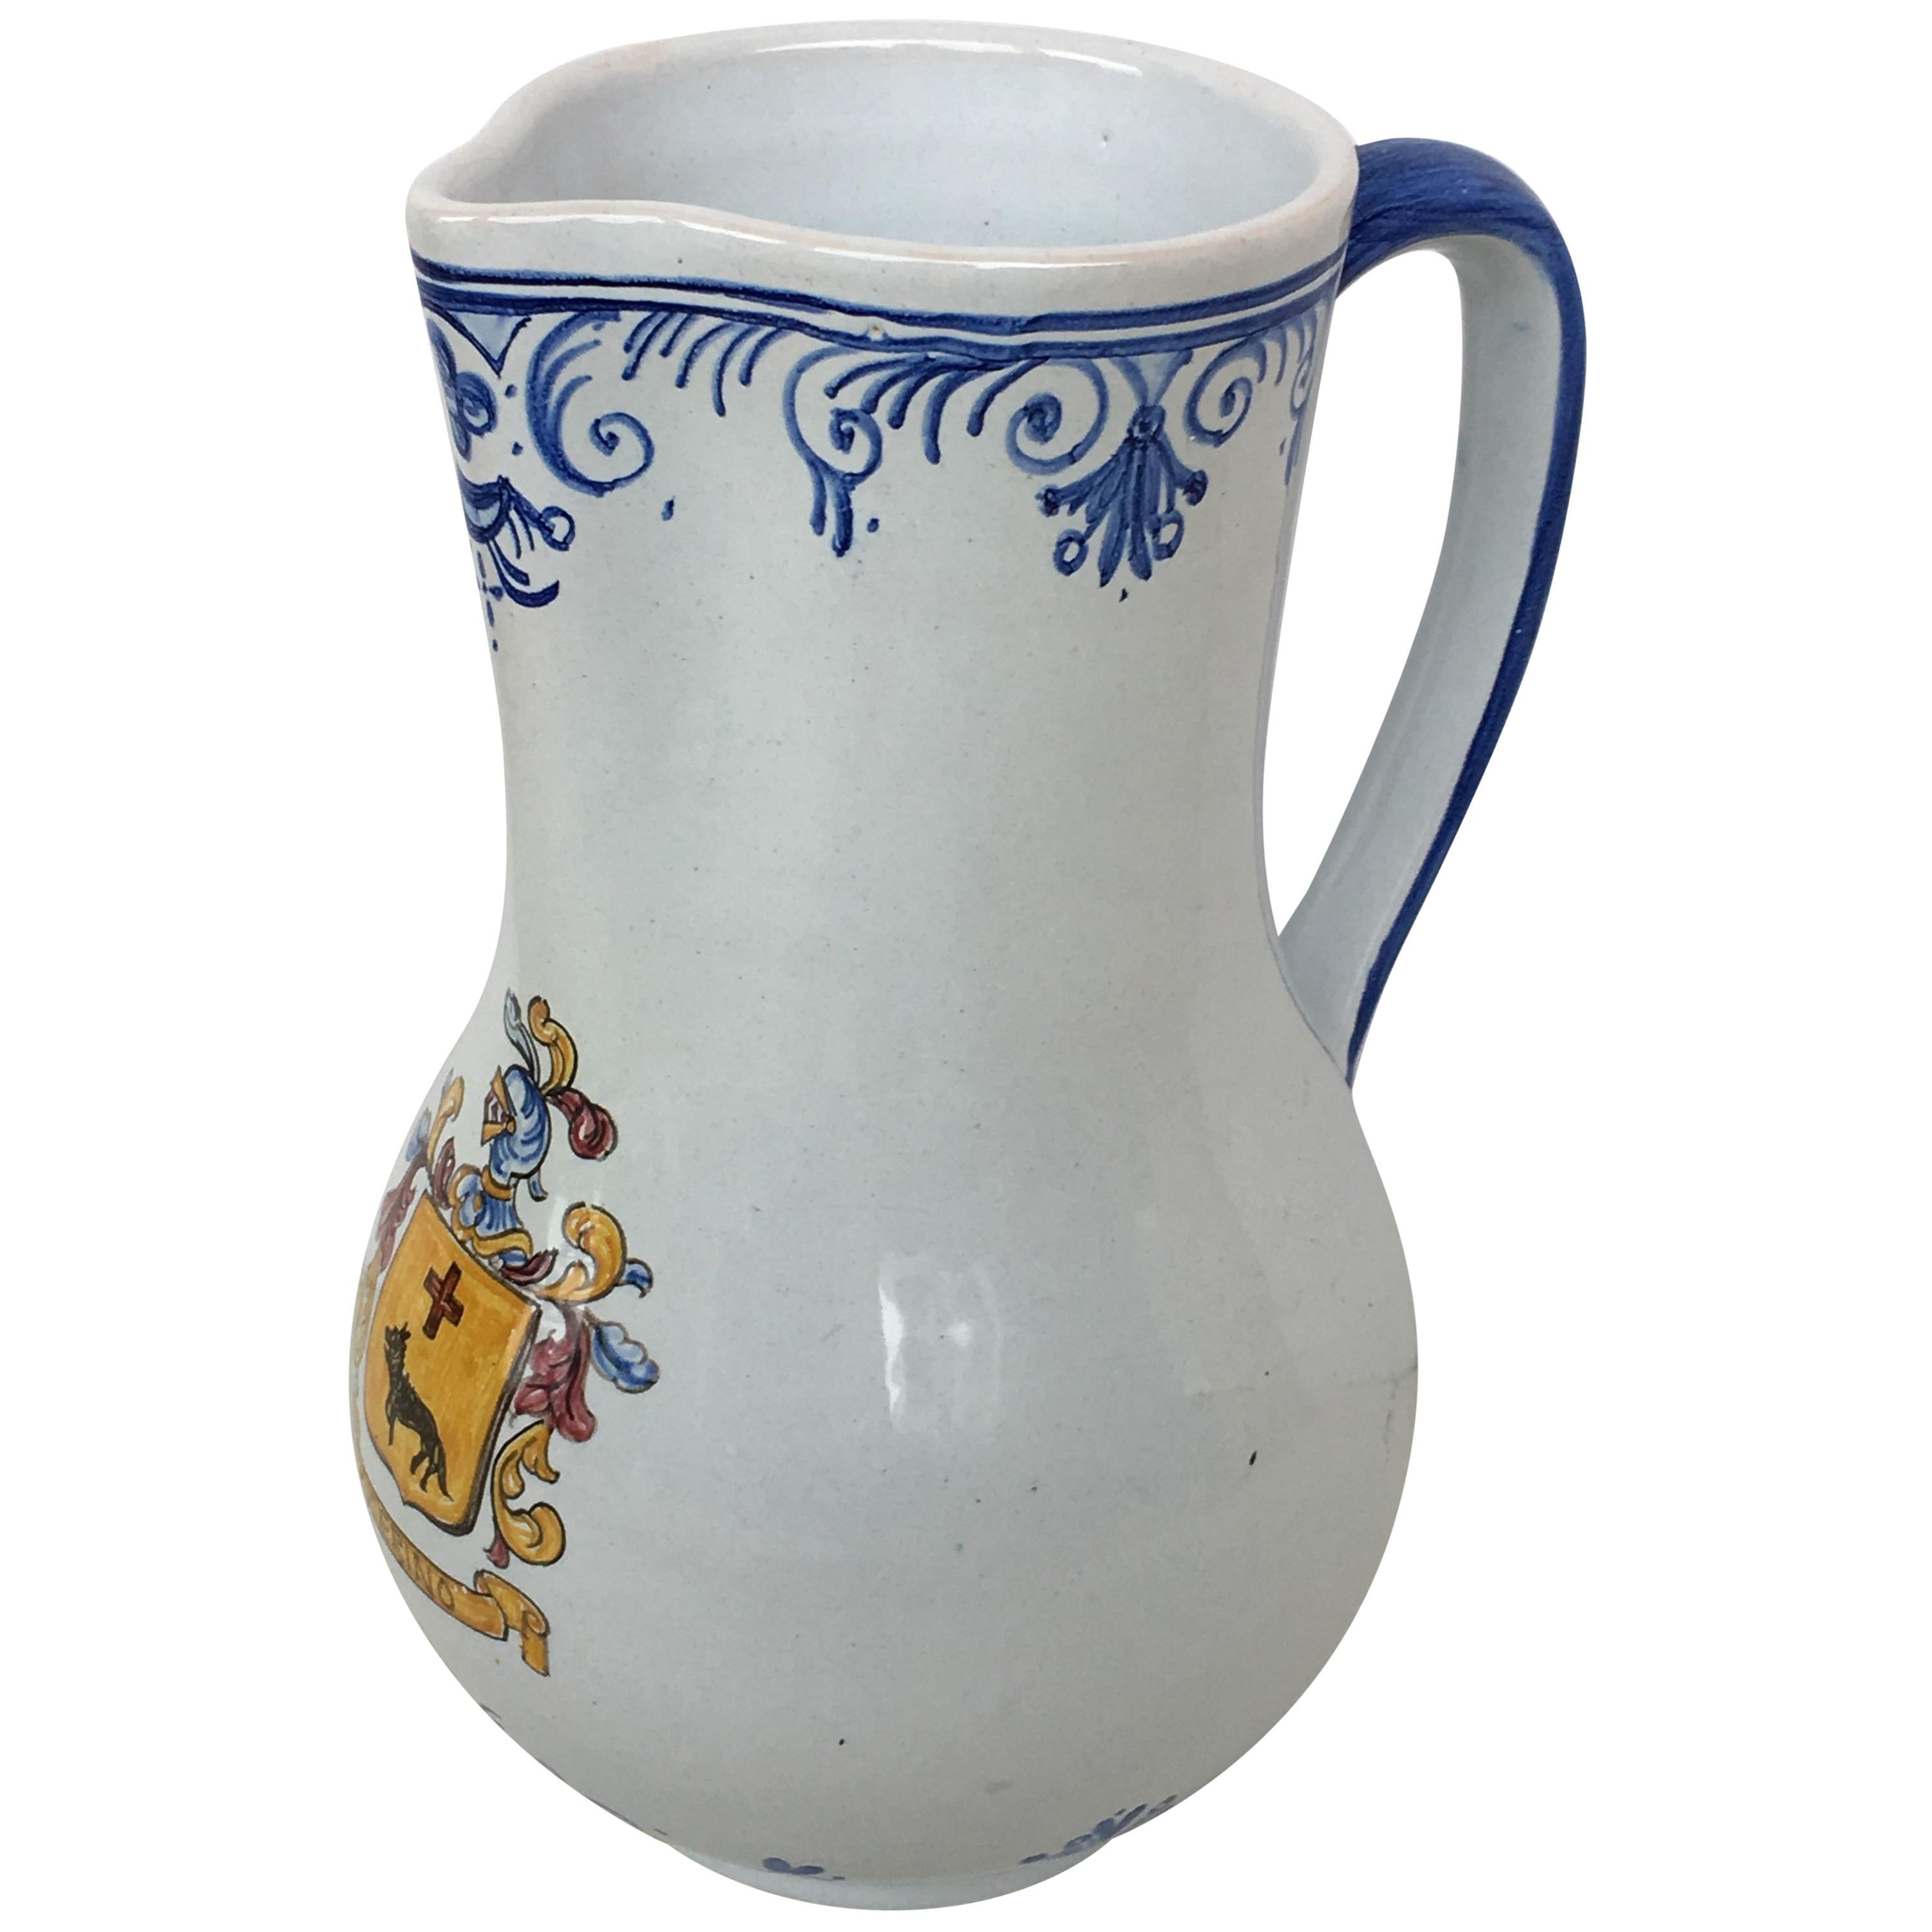 20th Century Glazed Earthenware Blue and White Painted Pitcher, Signed Talavera